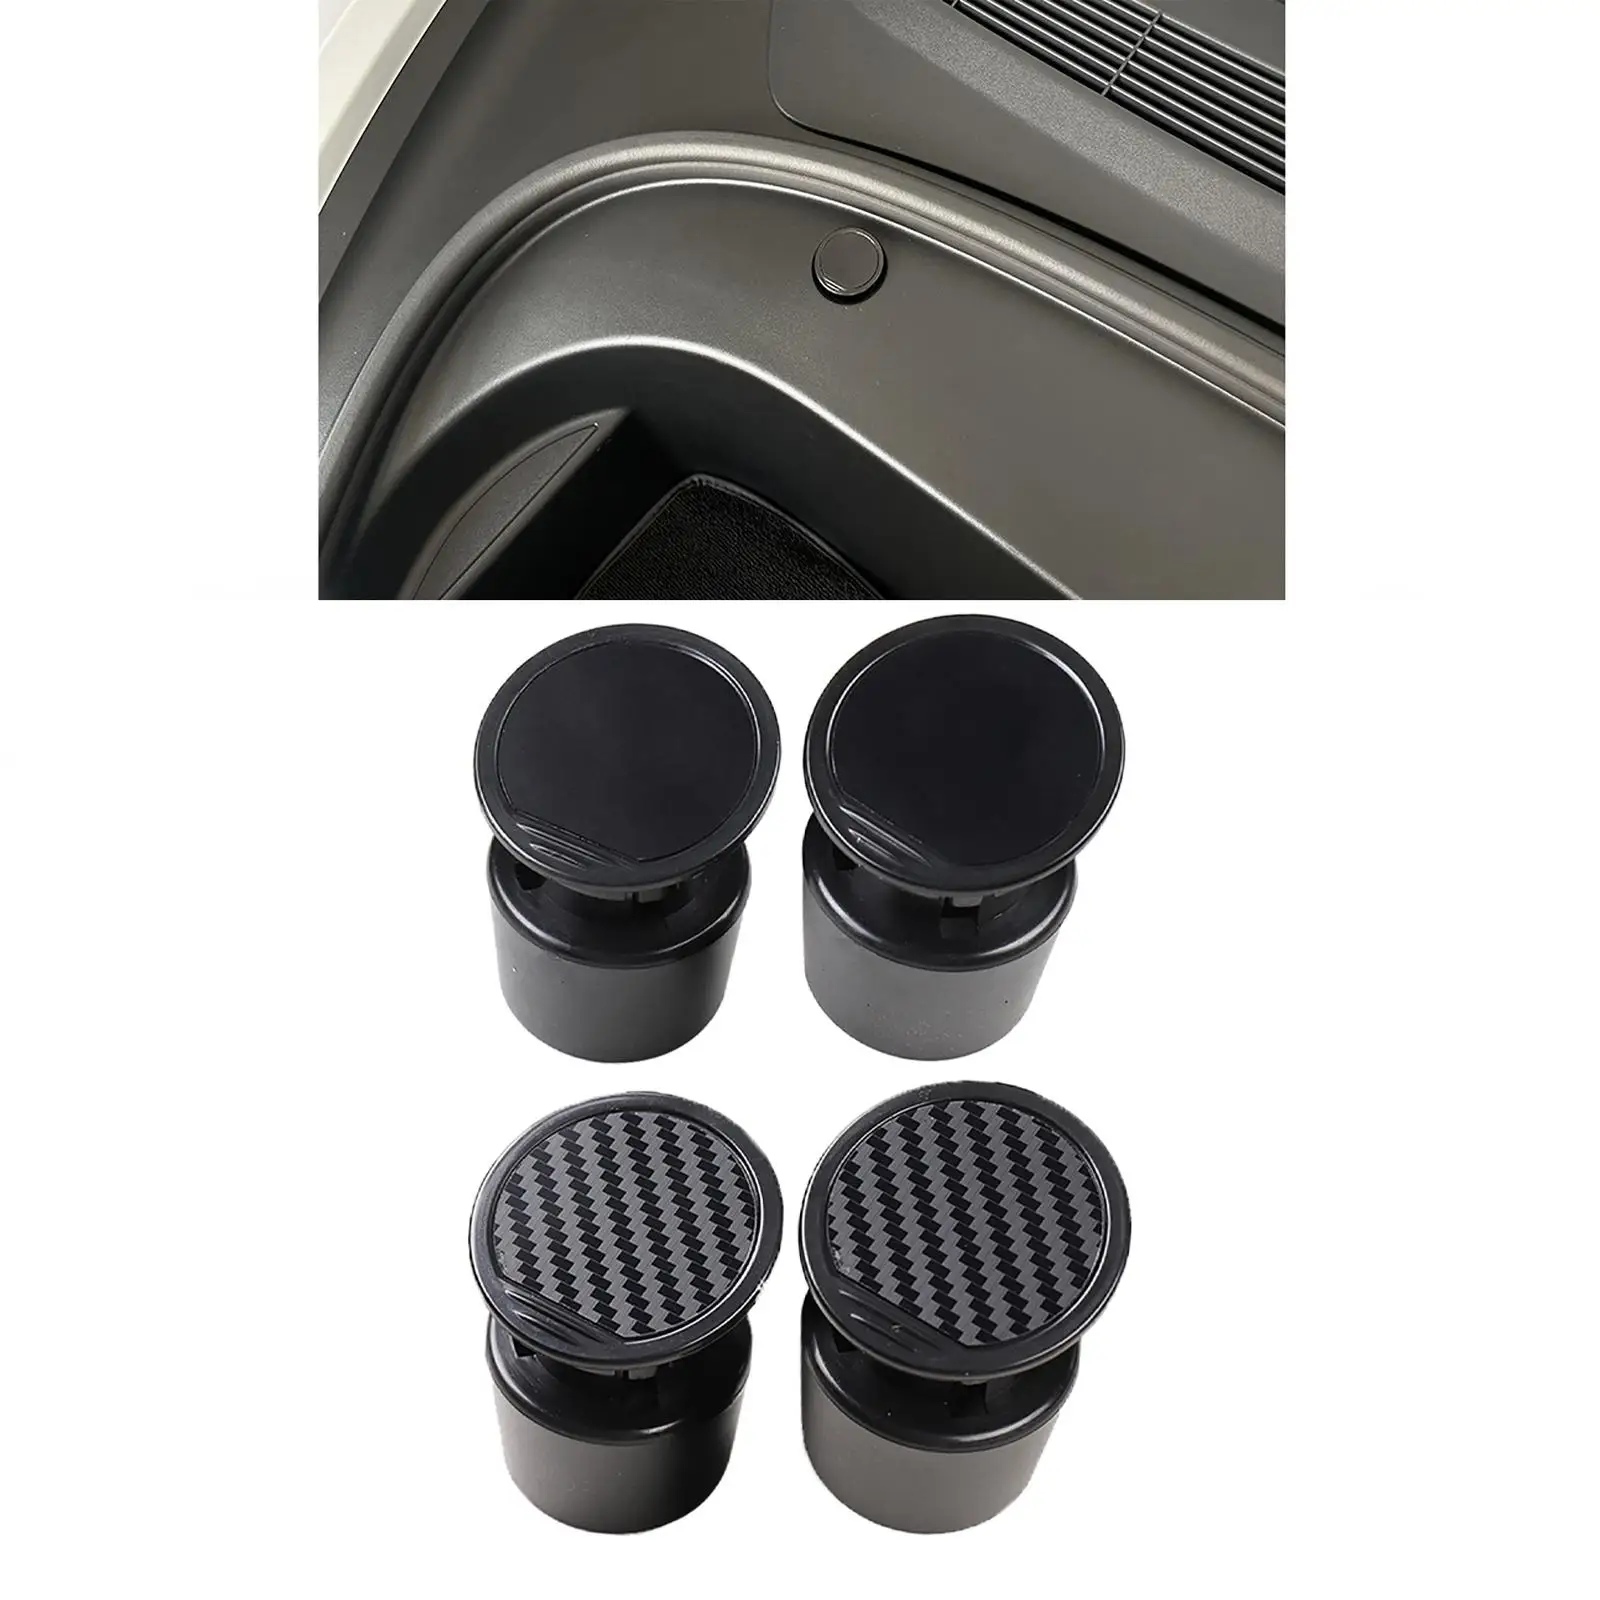 2 Pieces Auto Hidden Hook Front Trunk Decor Fastener Clip Space-Saving Organization Left Right Side Fit for Tesla Model 3 2022